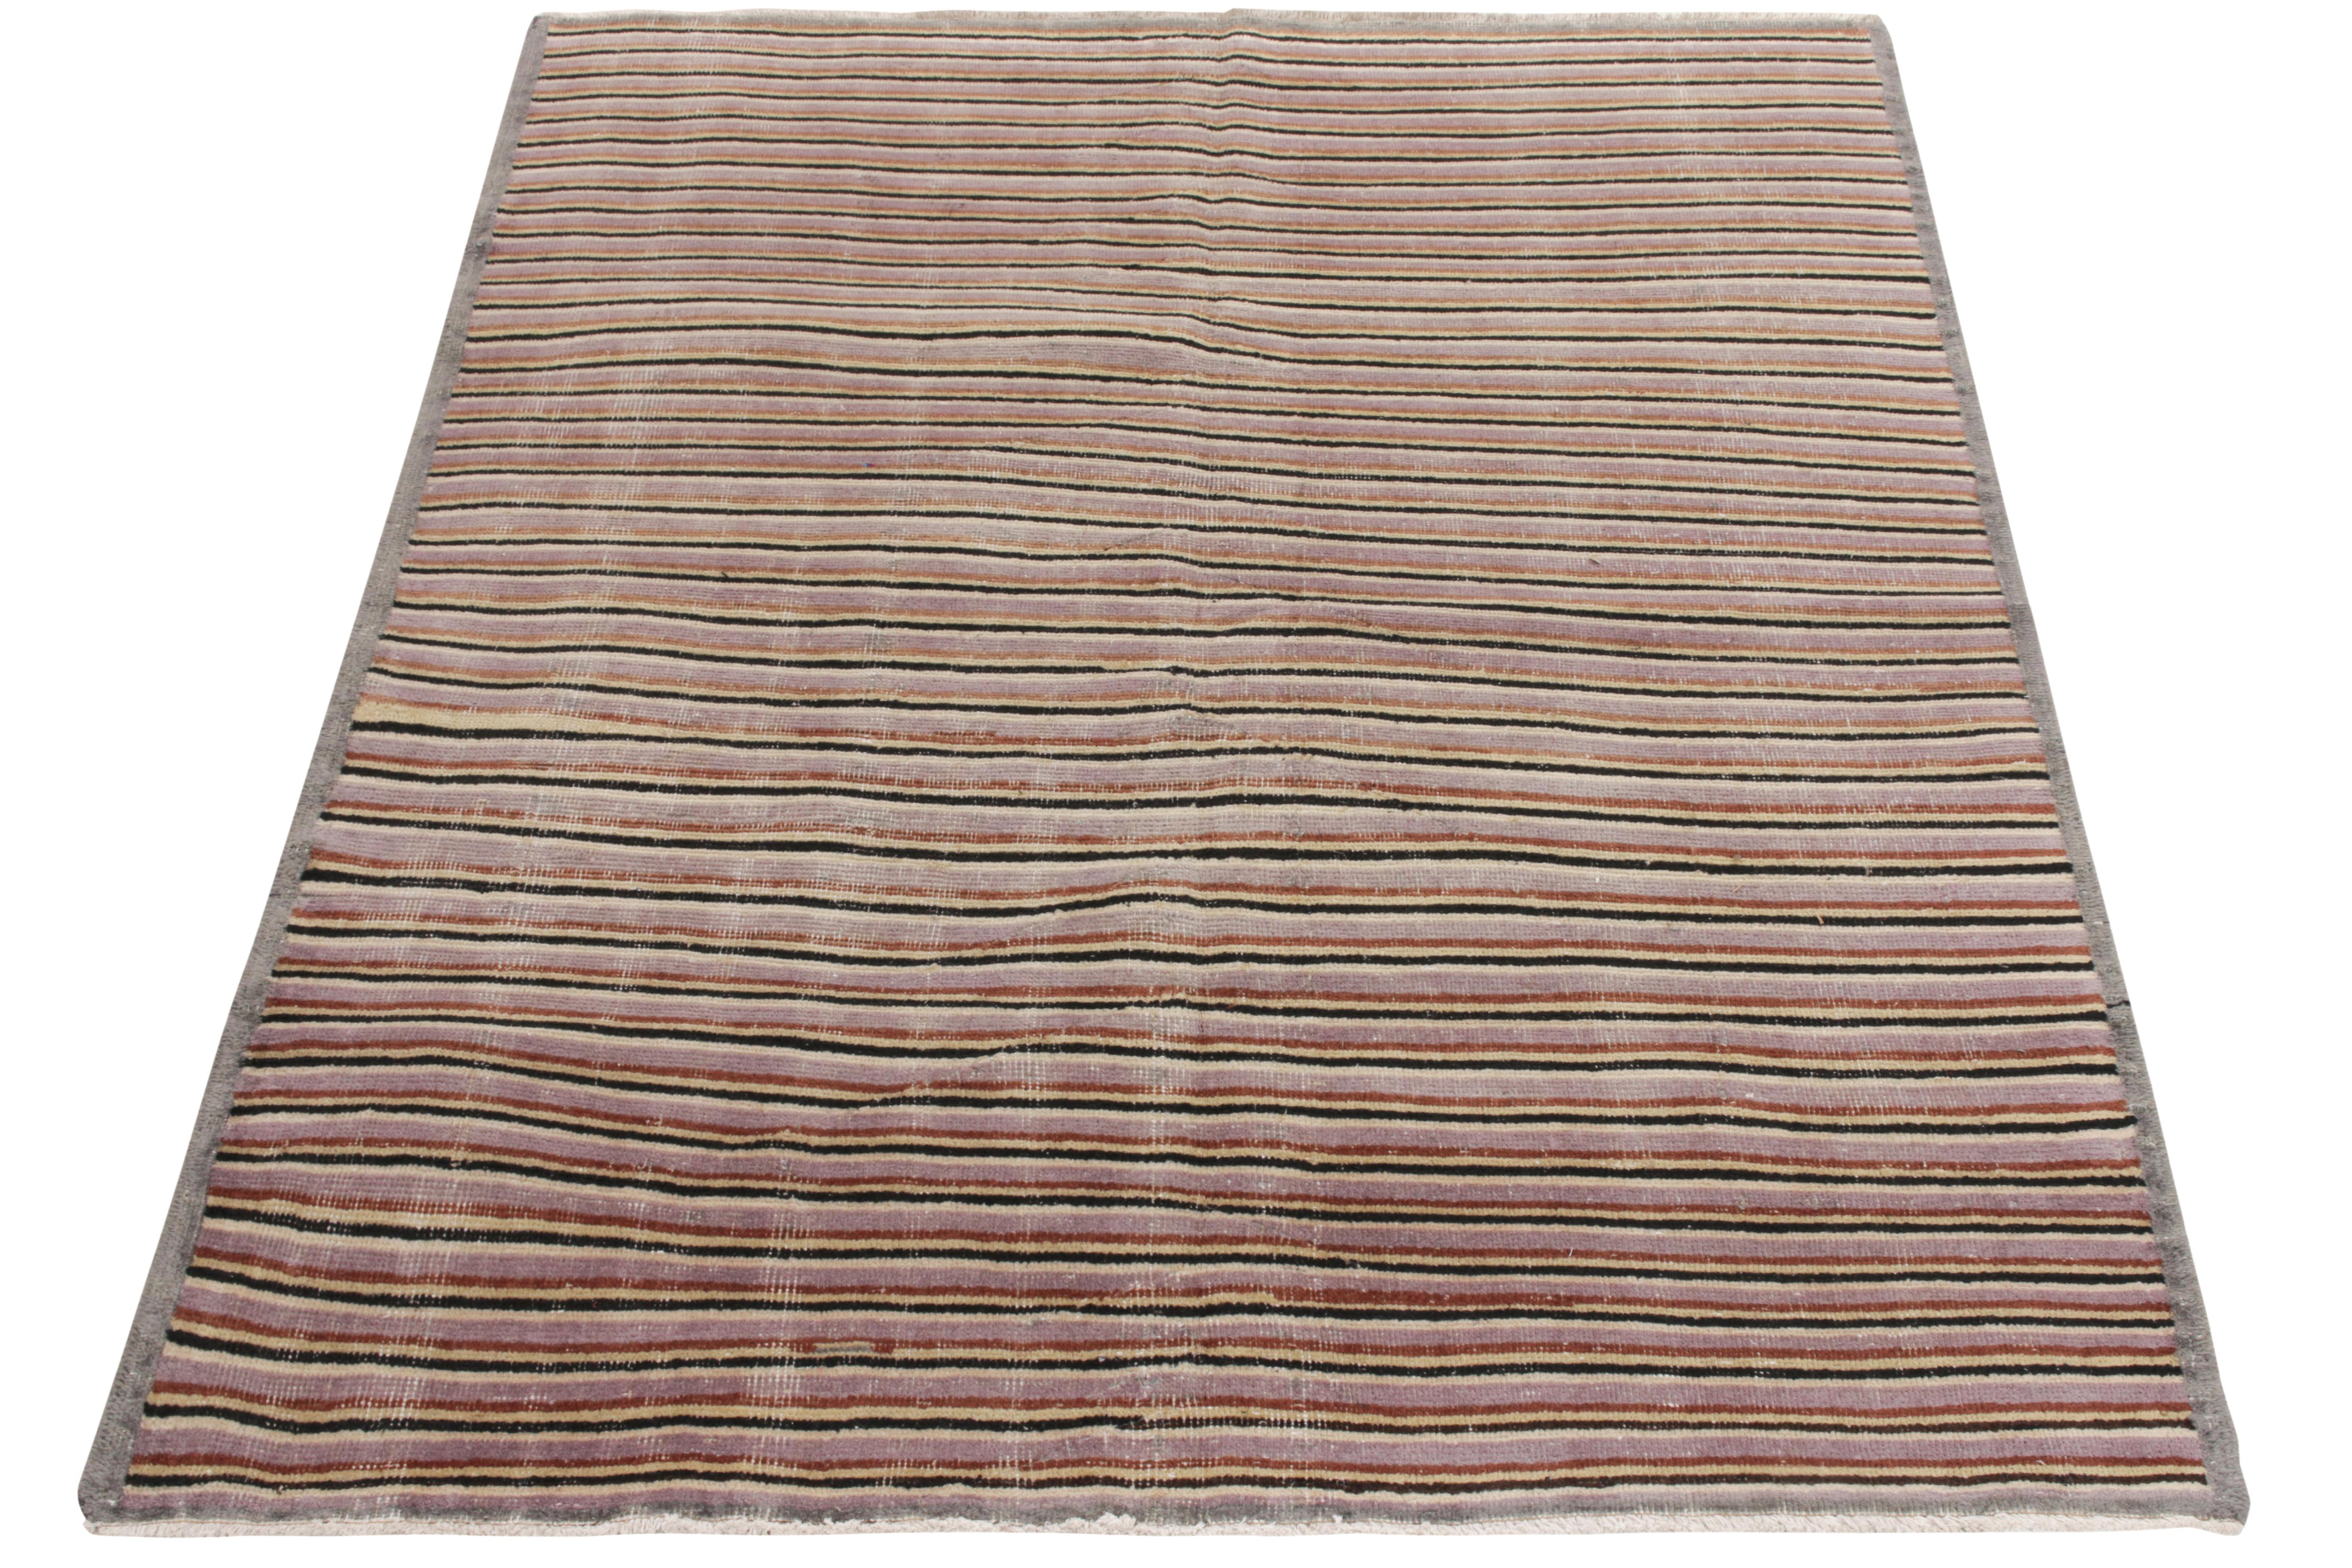 Mid-Century Modern 1960s Vintage Distressed Rug in Gray, Brown Striped Pattern by Rug & Kilim For Sale